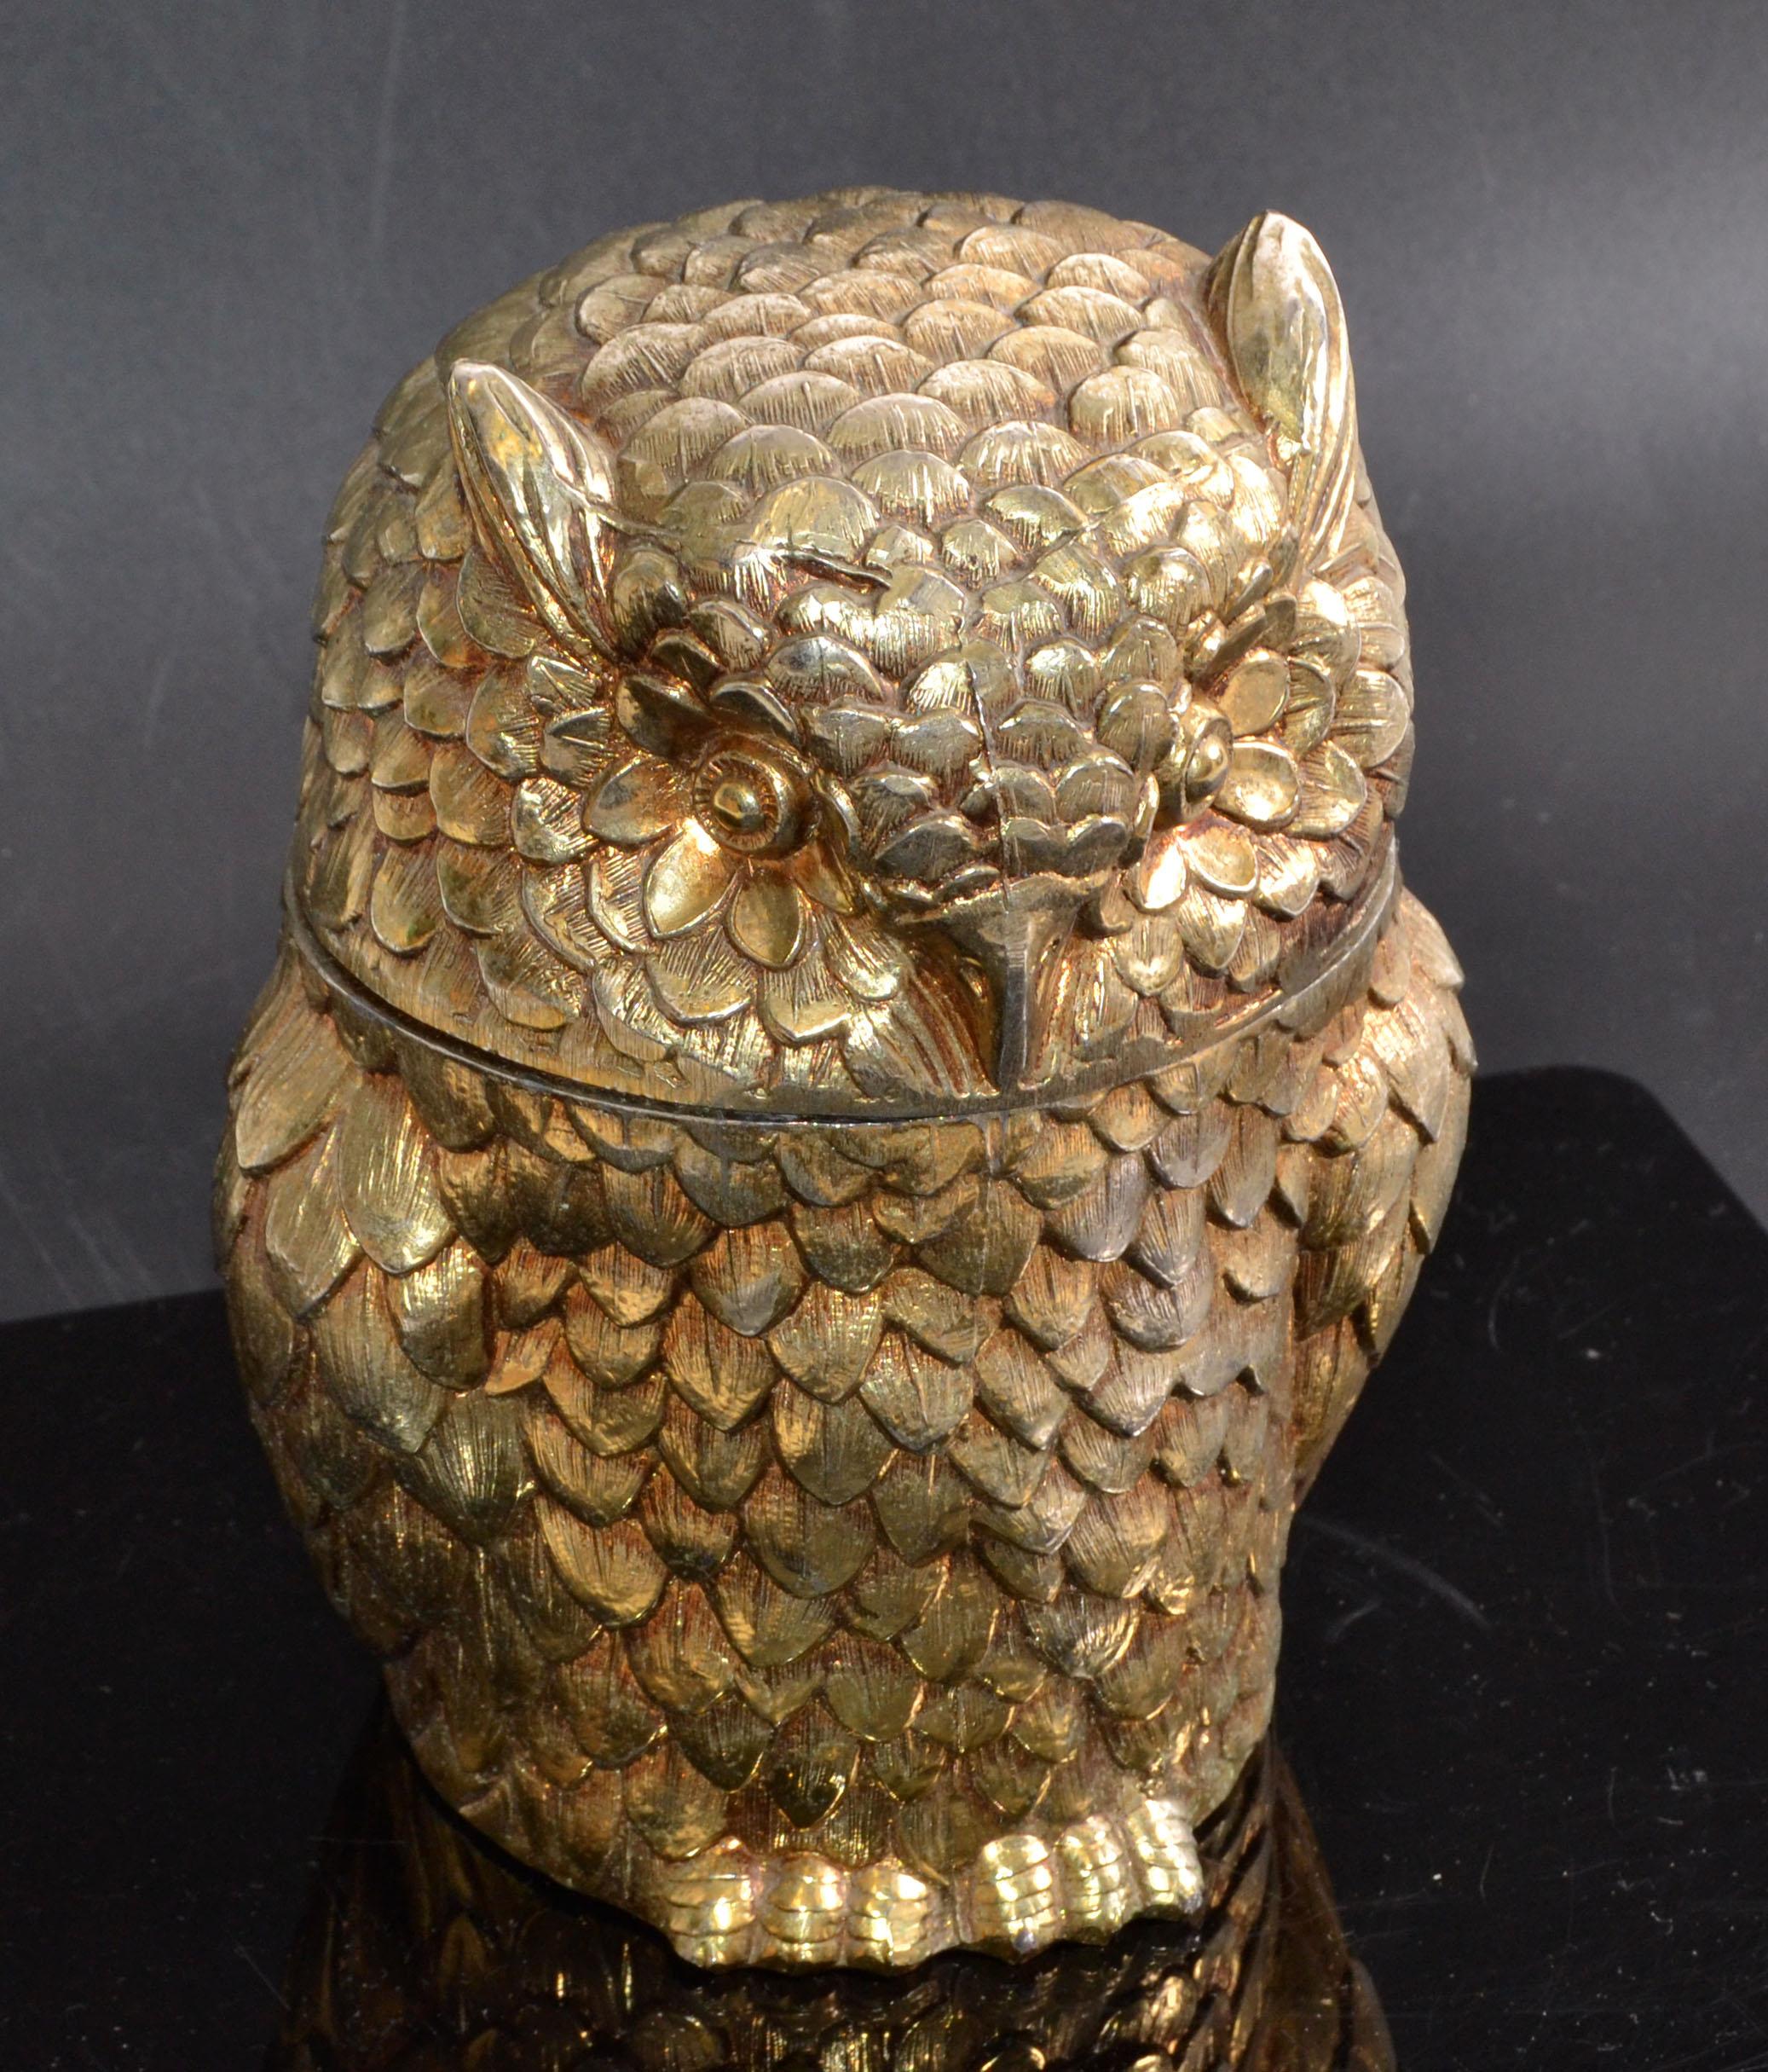 1940s Original Mauro Manetti gold plate owl ice bucket with metal insulation, made in Italy.
Keeps the ice cubes frozen for a long time as the lid sits tight on the bucket.
Highly favored Collectors treasure.
Please take a look at our large